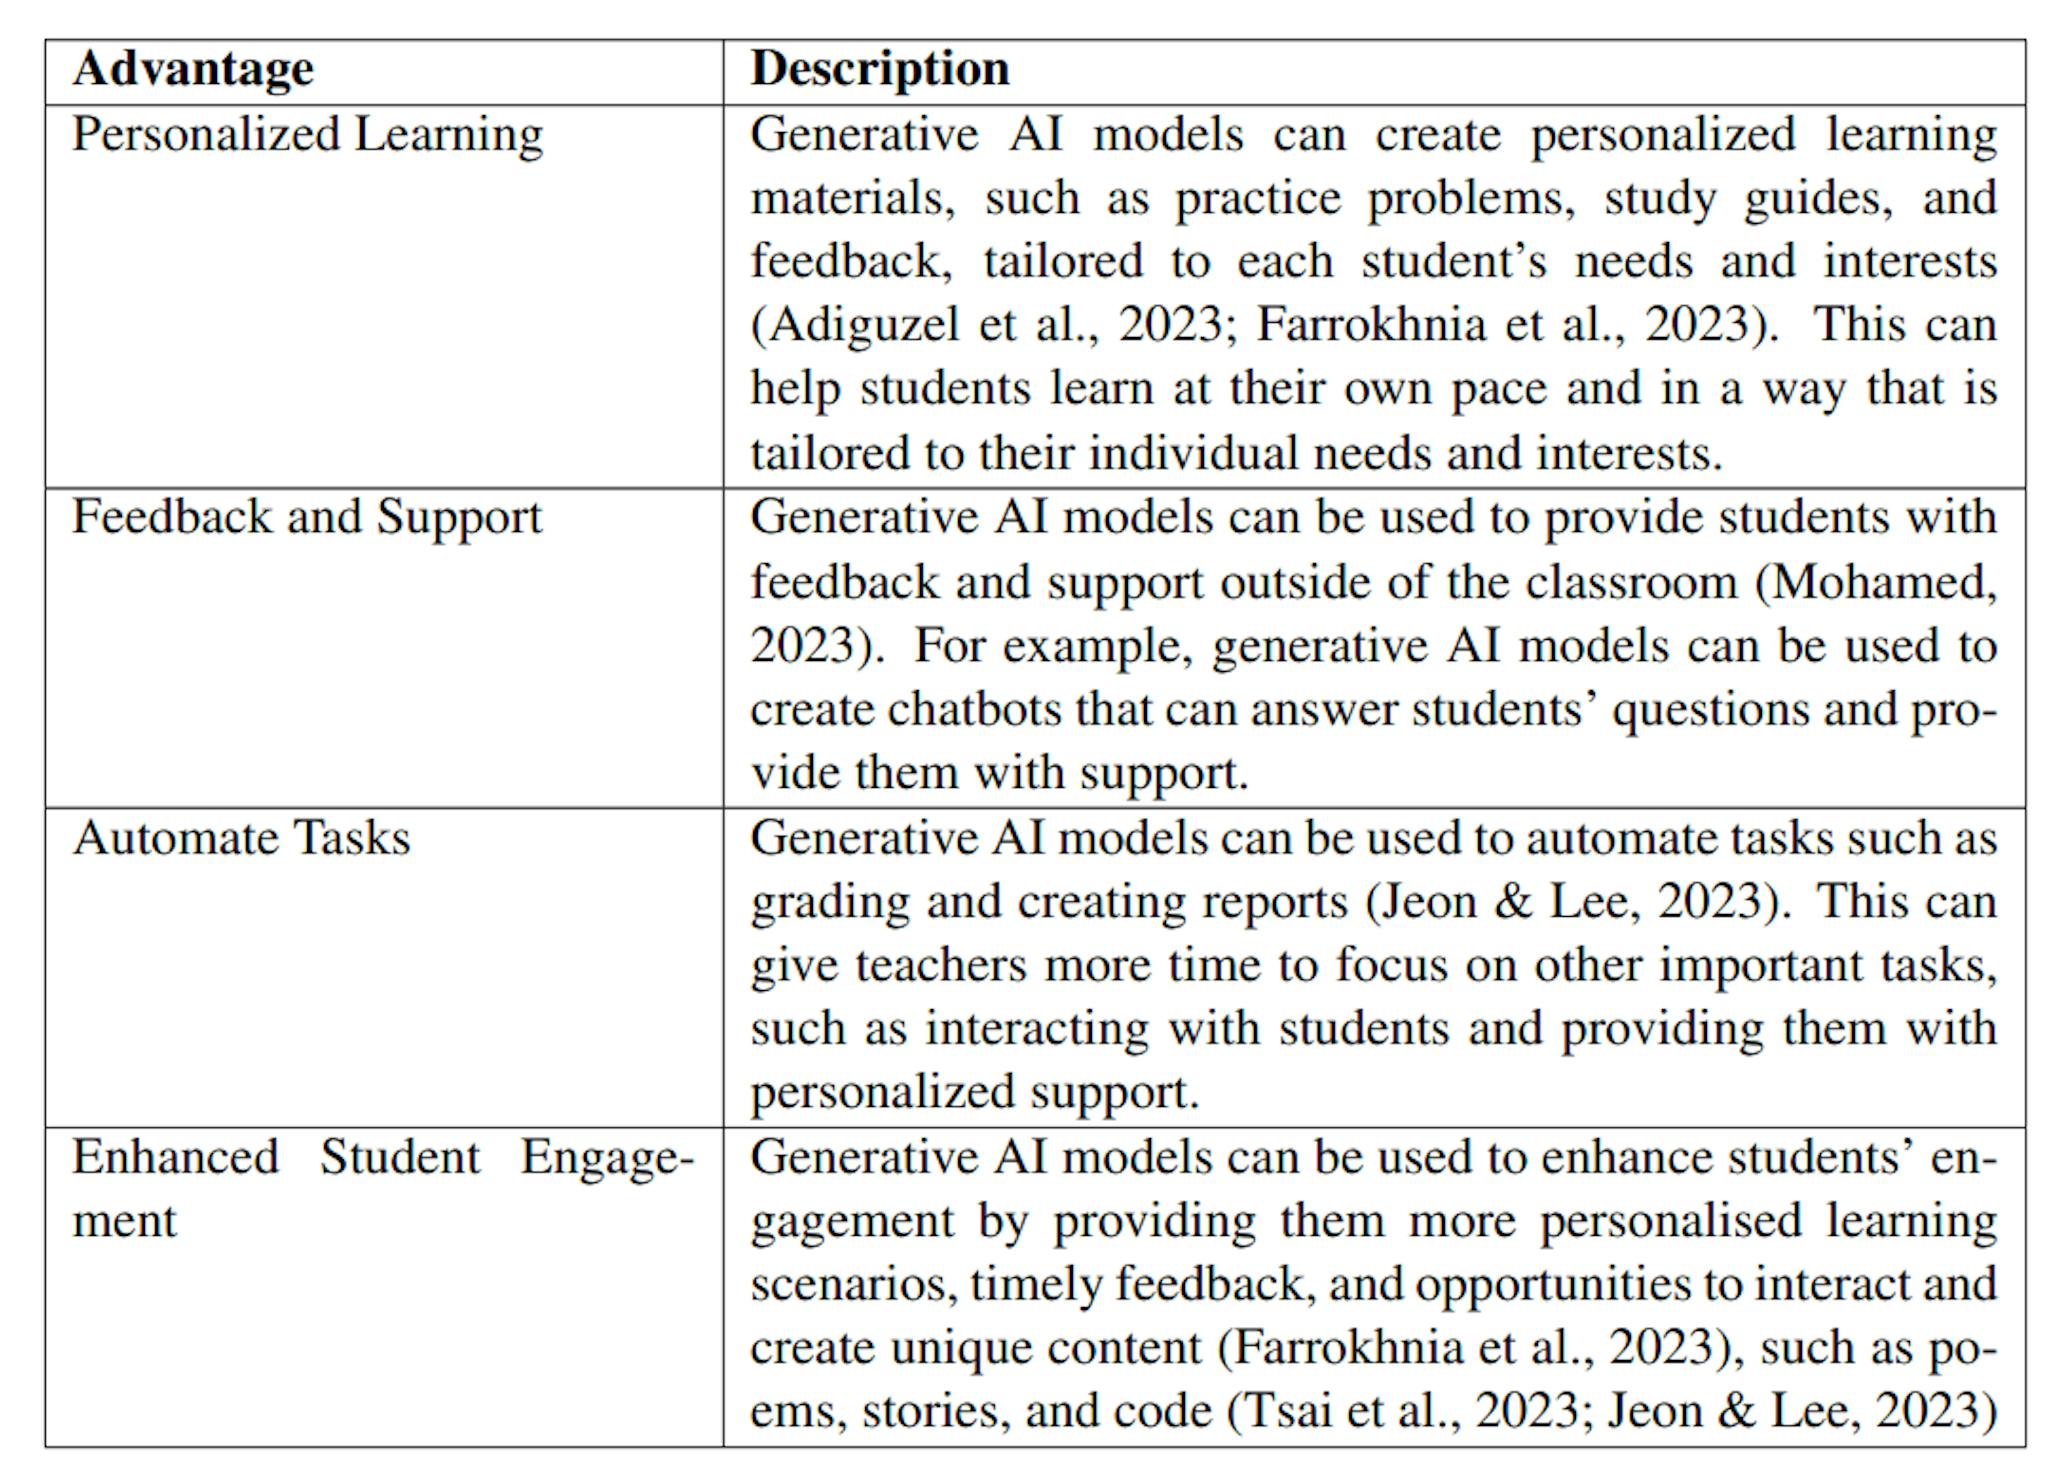 Table 1: Advantages of Using Generative AI Models in Education